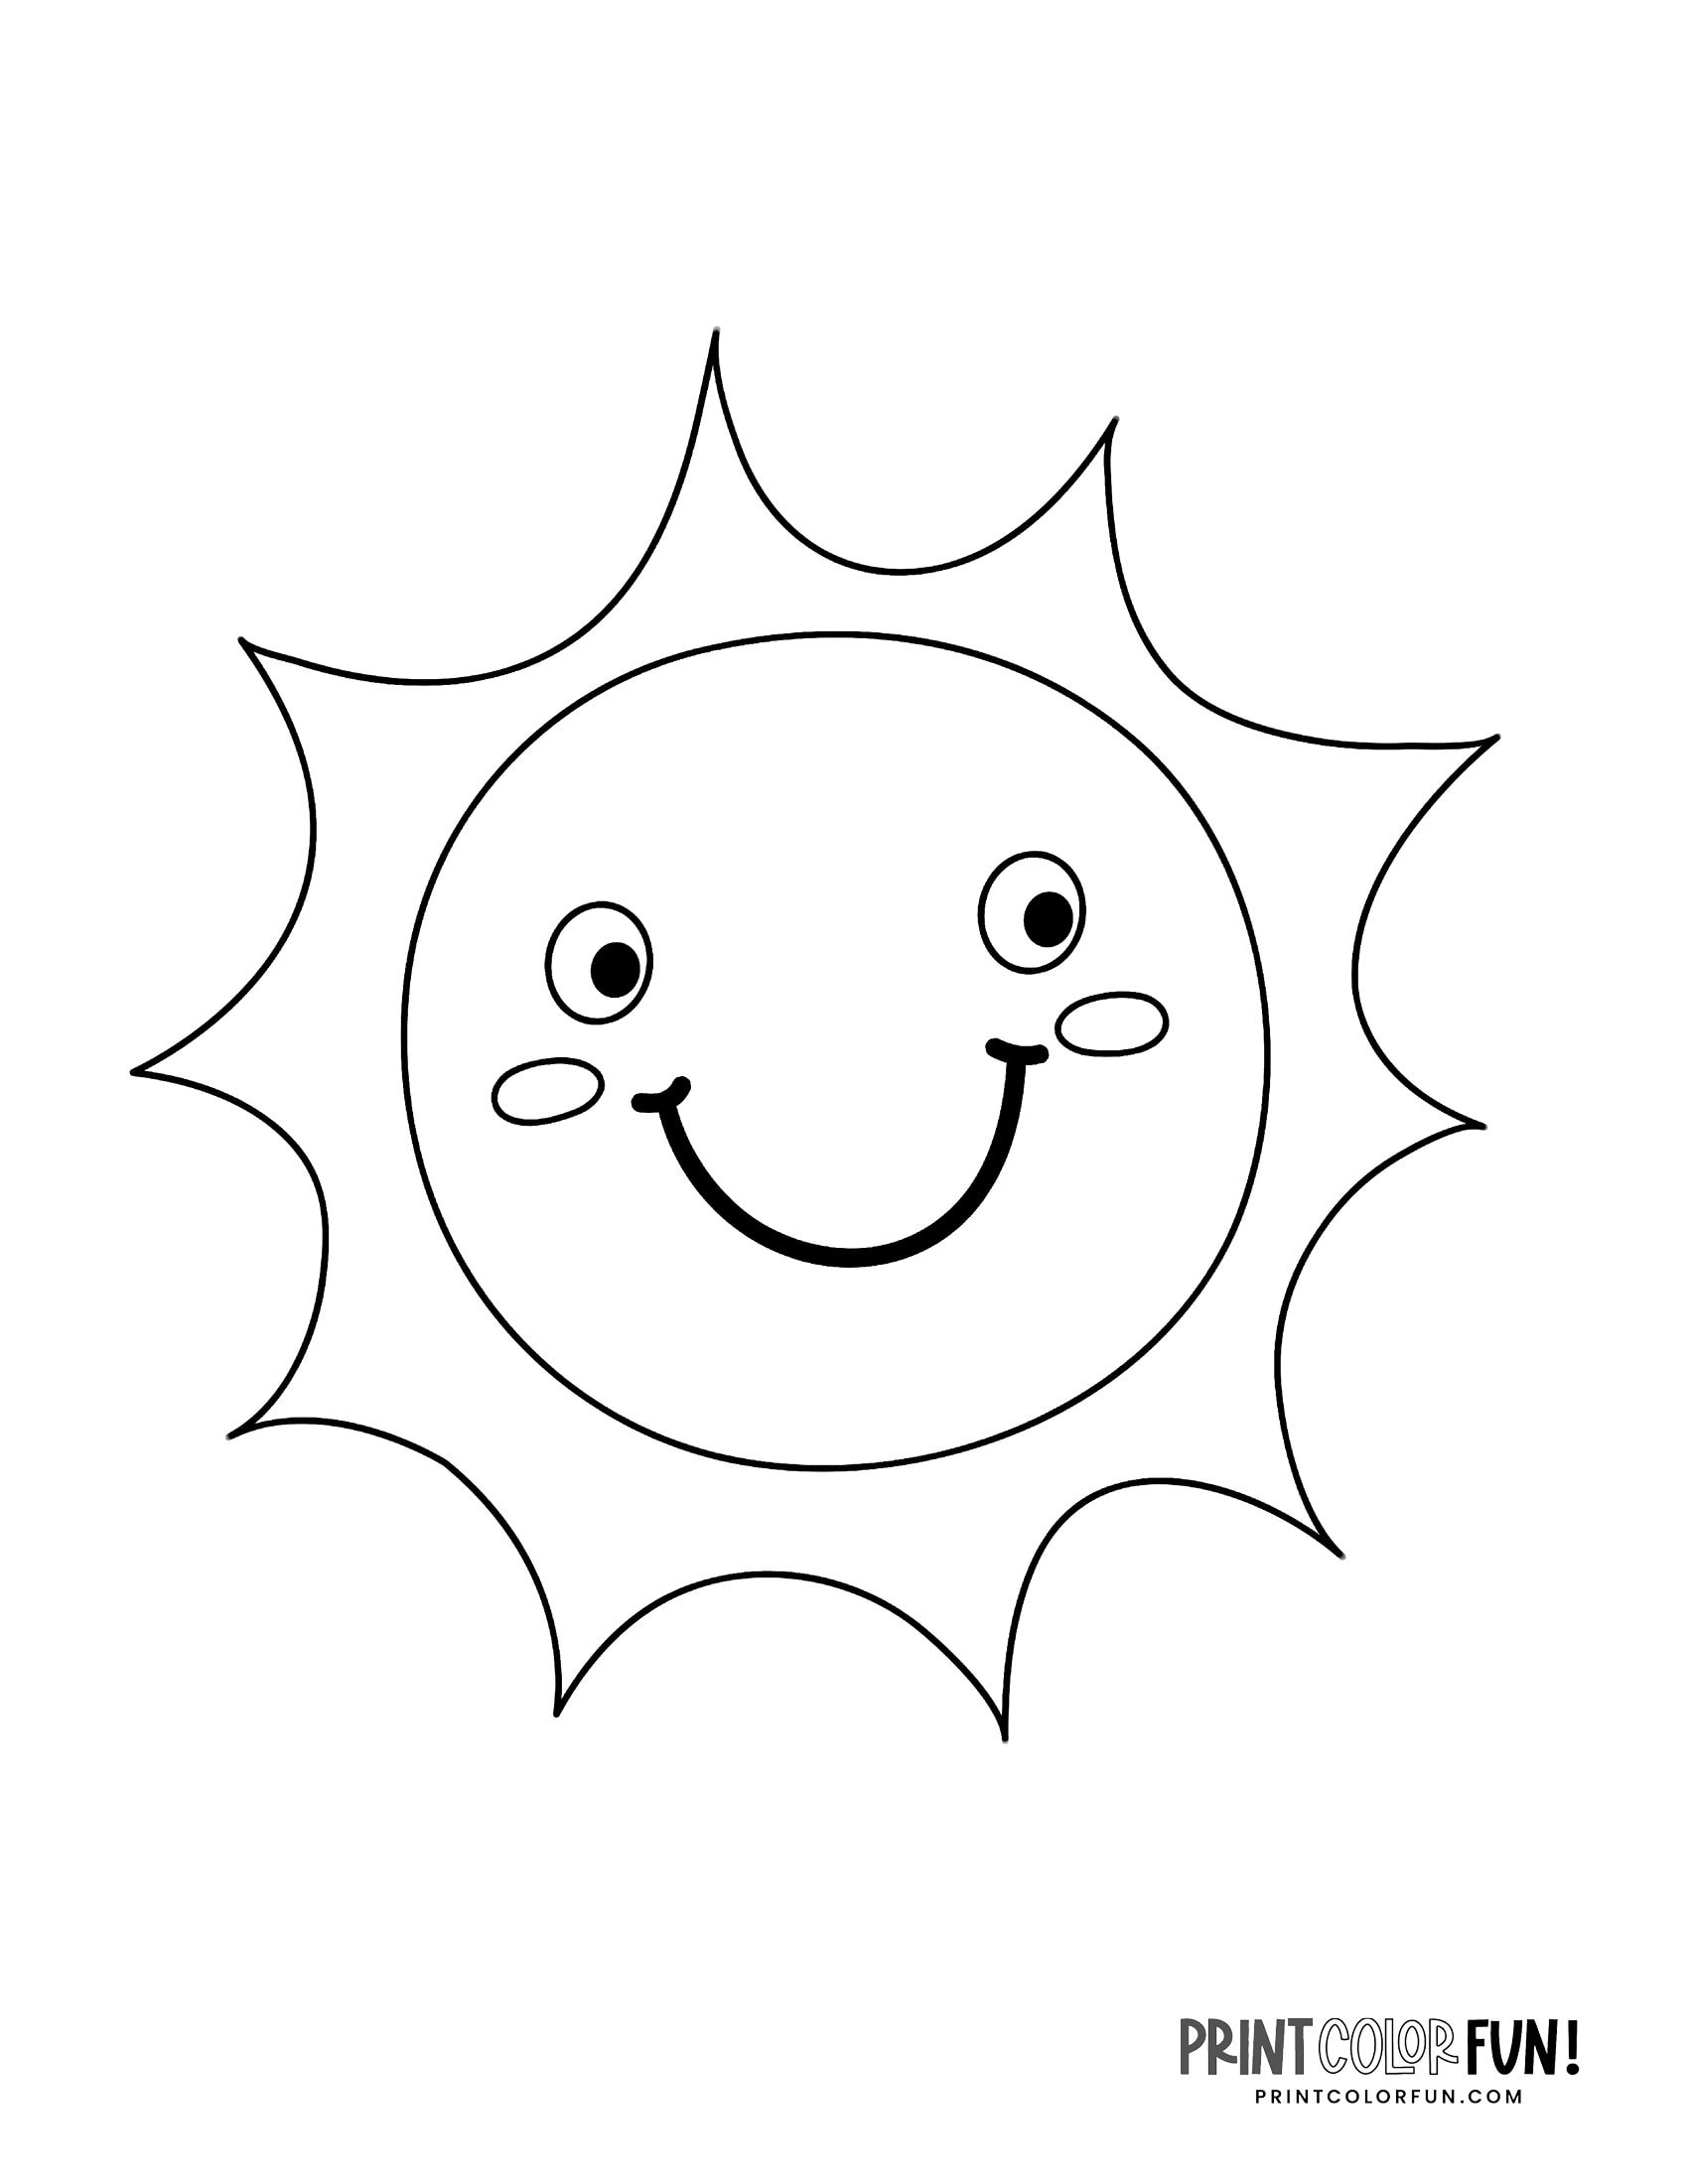 sun coloring fun printable cute shapes stylized abstract